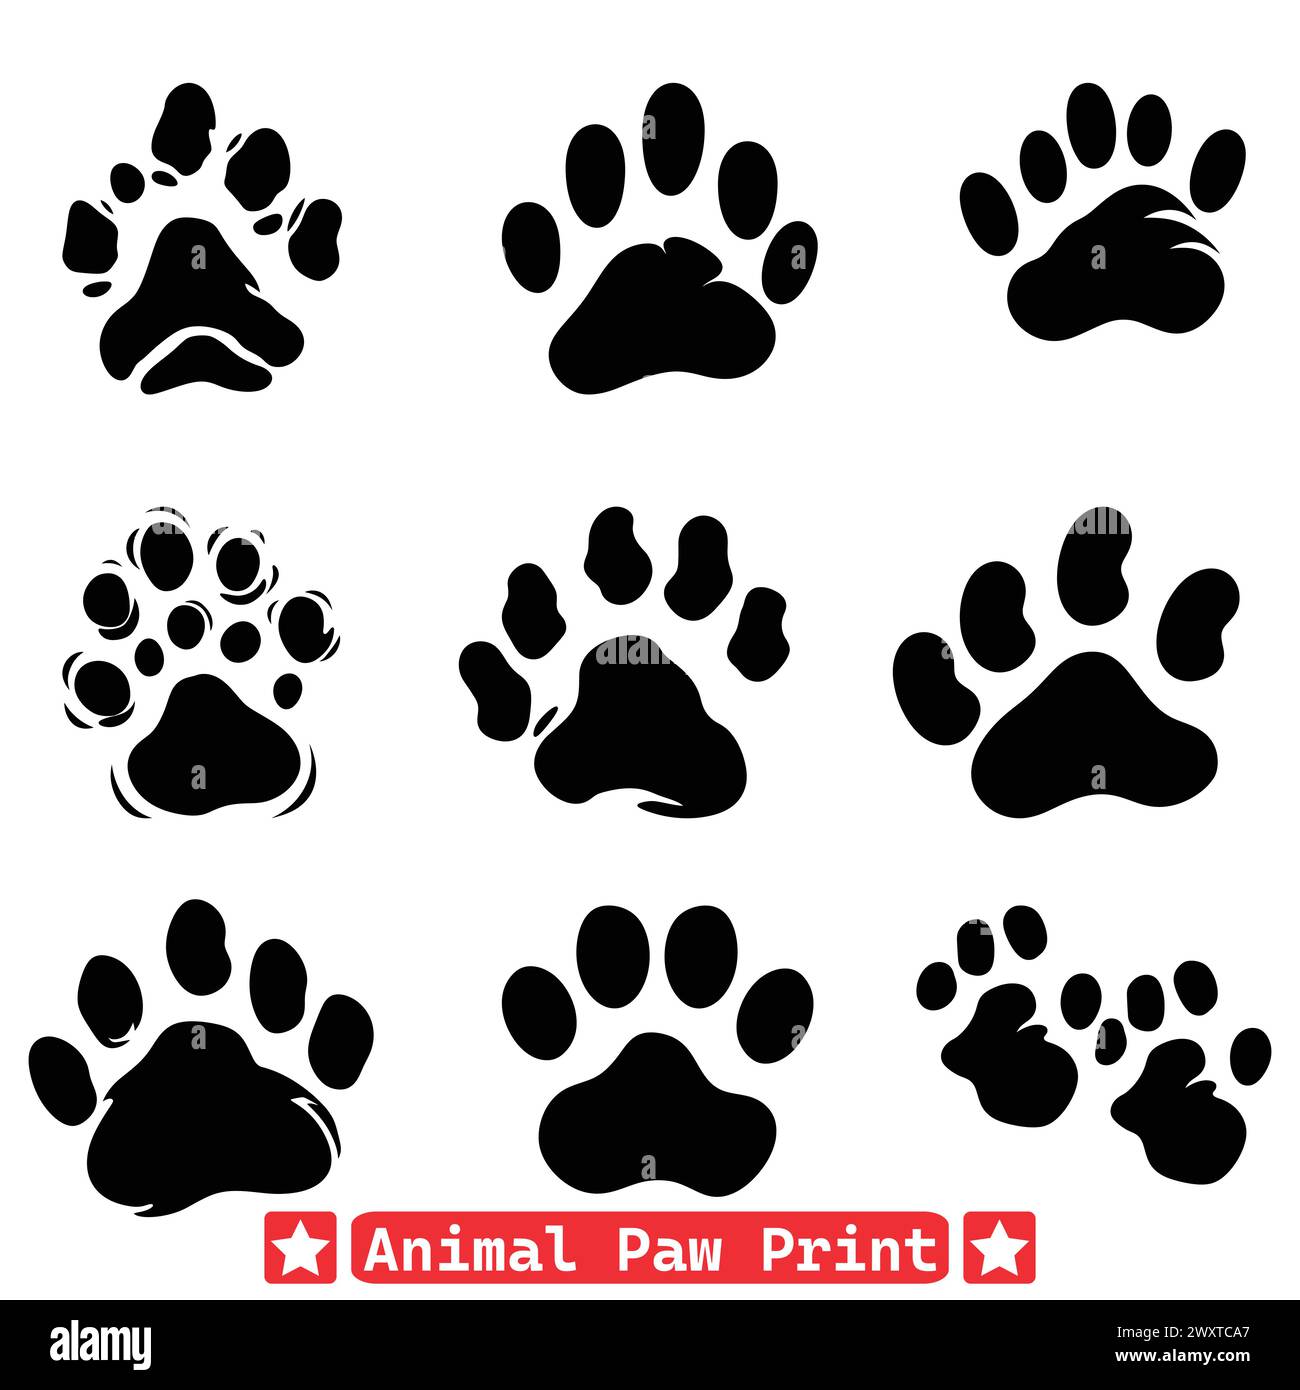 Unleash your creativity with our intricate animal paw print vector silhouette design. Whether for posters, apparel, or digital artwork, it adds a wild Stock Vector